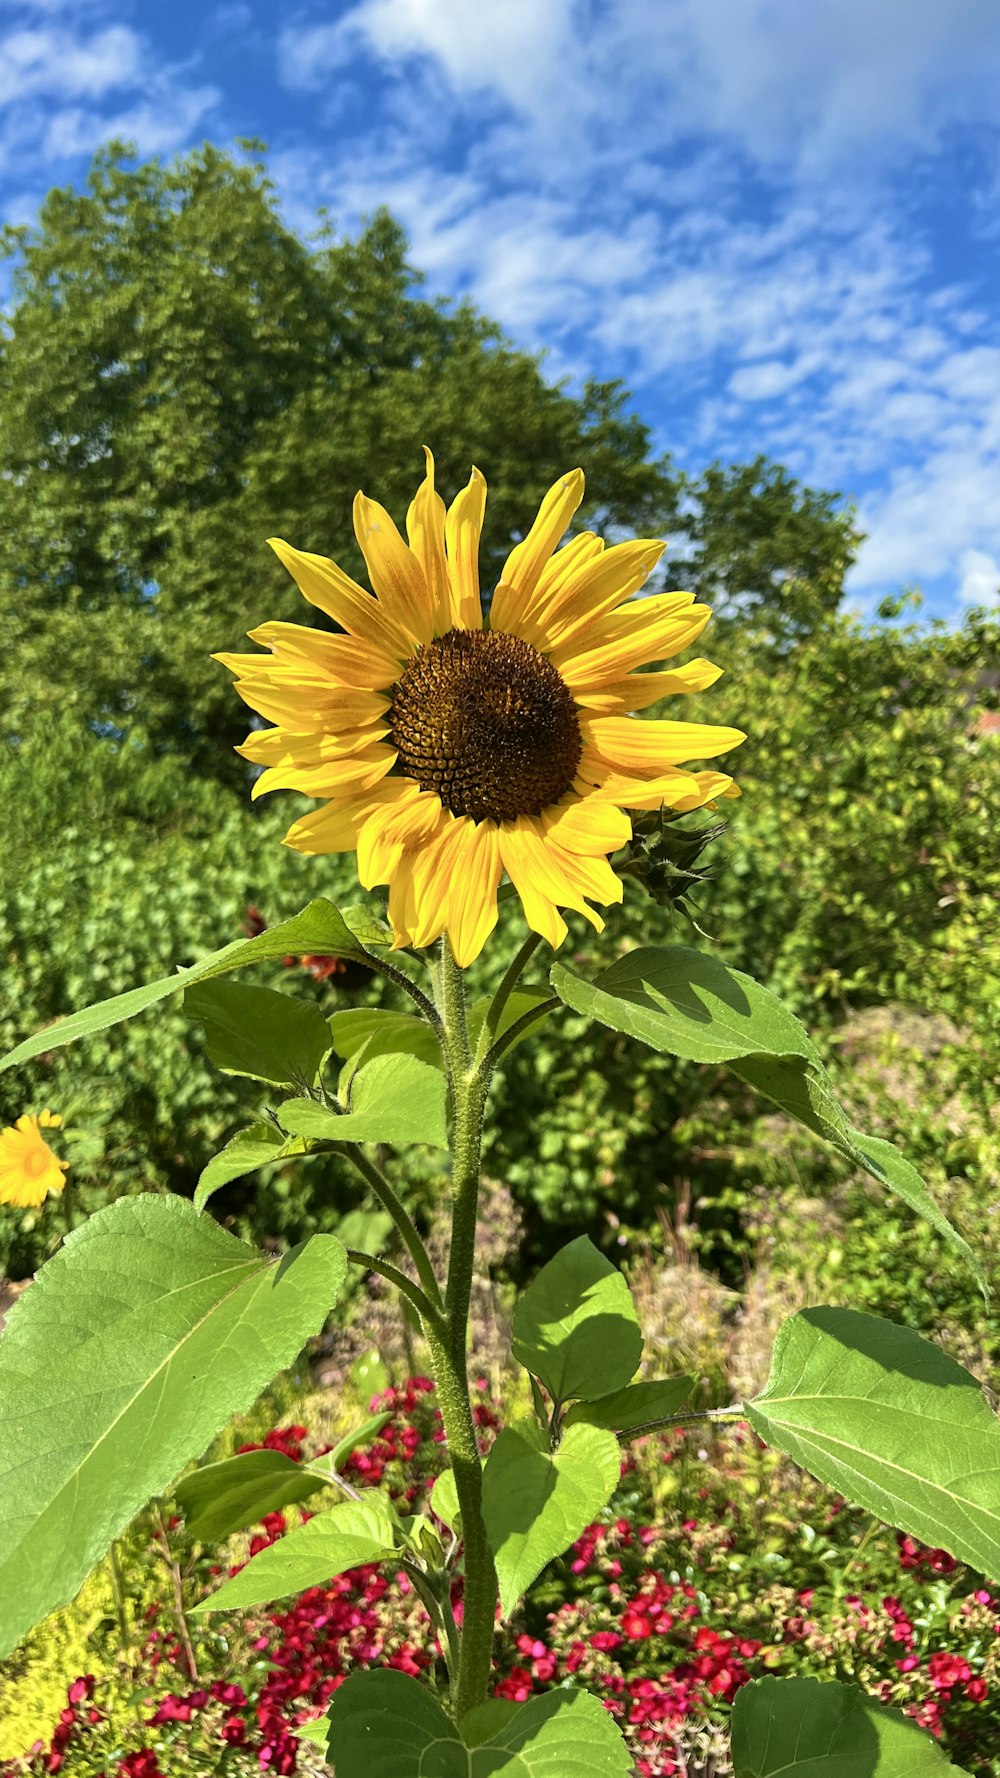 a sunflower in a field of flowers with a blue sky in the background